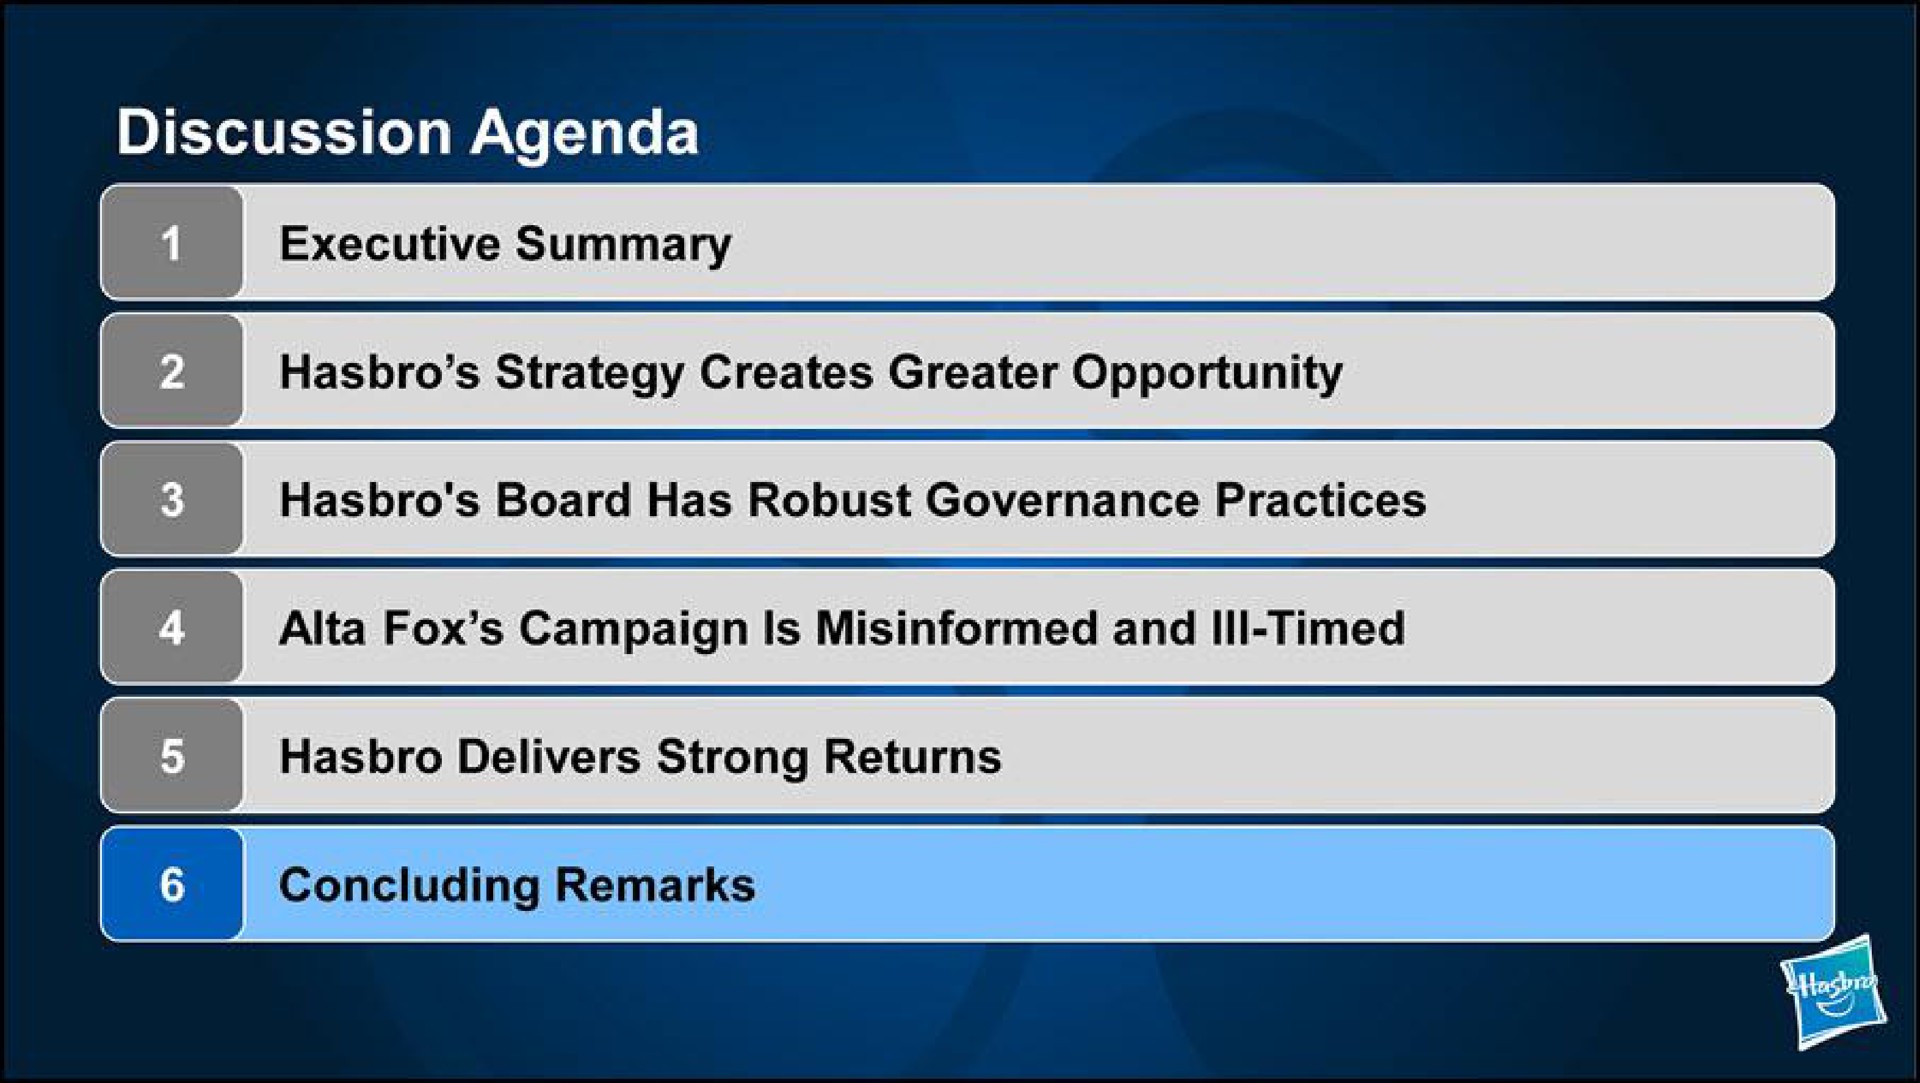 discussion agenda executive summary strategy creates greater opportunity board has robust governance practices delivers strong returns fox campaign is misinformed and timed concluding remarks | Hasbro